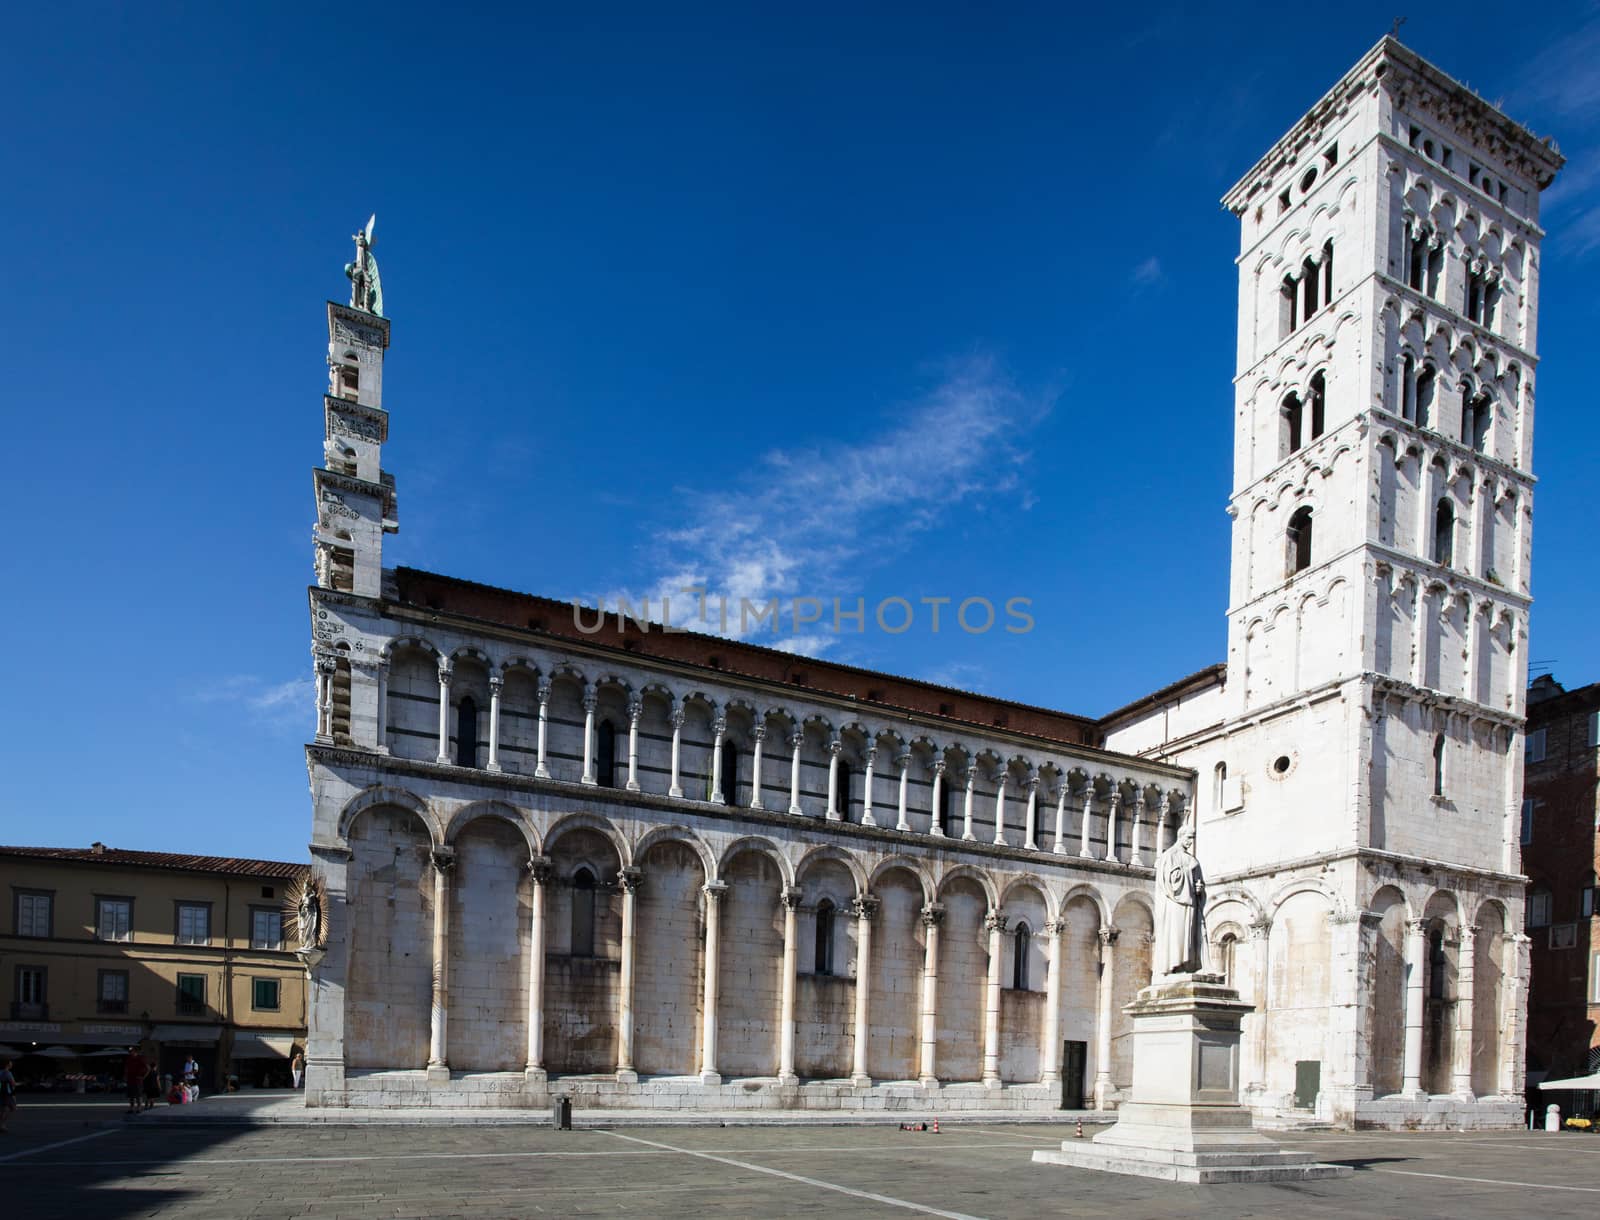 Catholic place of worship of Lucca, which is located in Piazza San Michele.